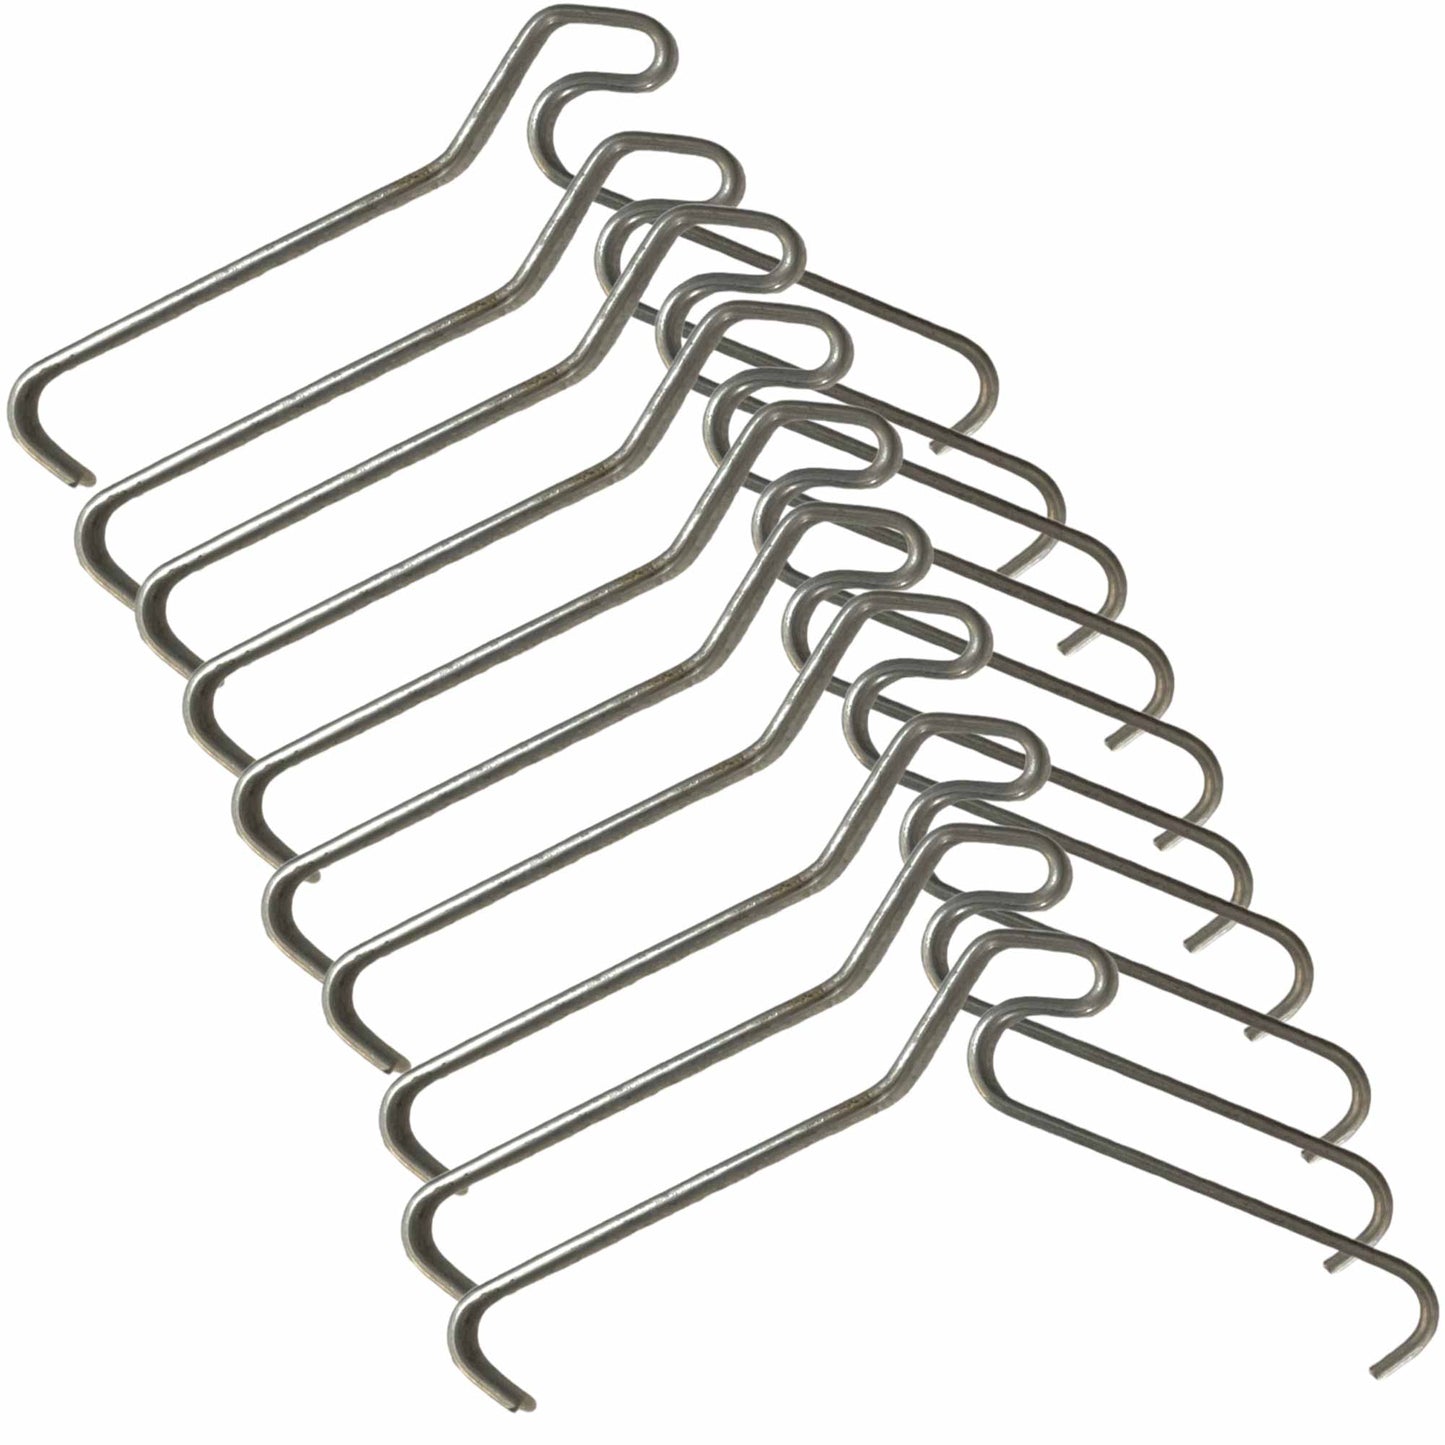 10 Pack 76mm (3") Brick Wall Hooks - Clips Hangers For Pictures Plants